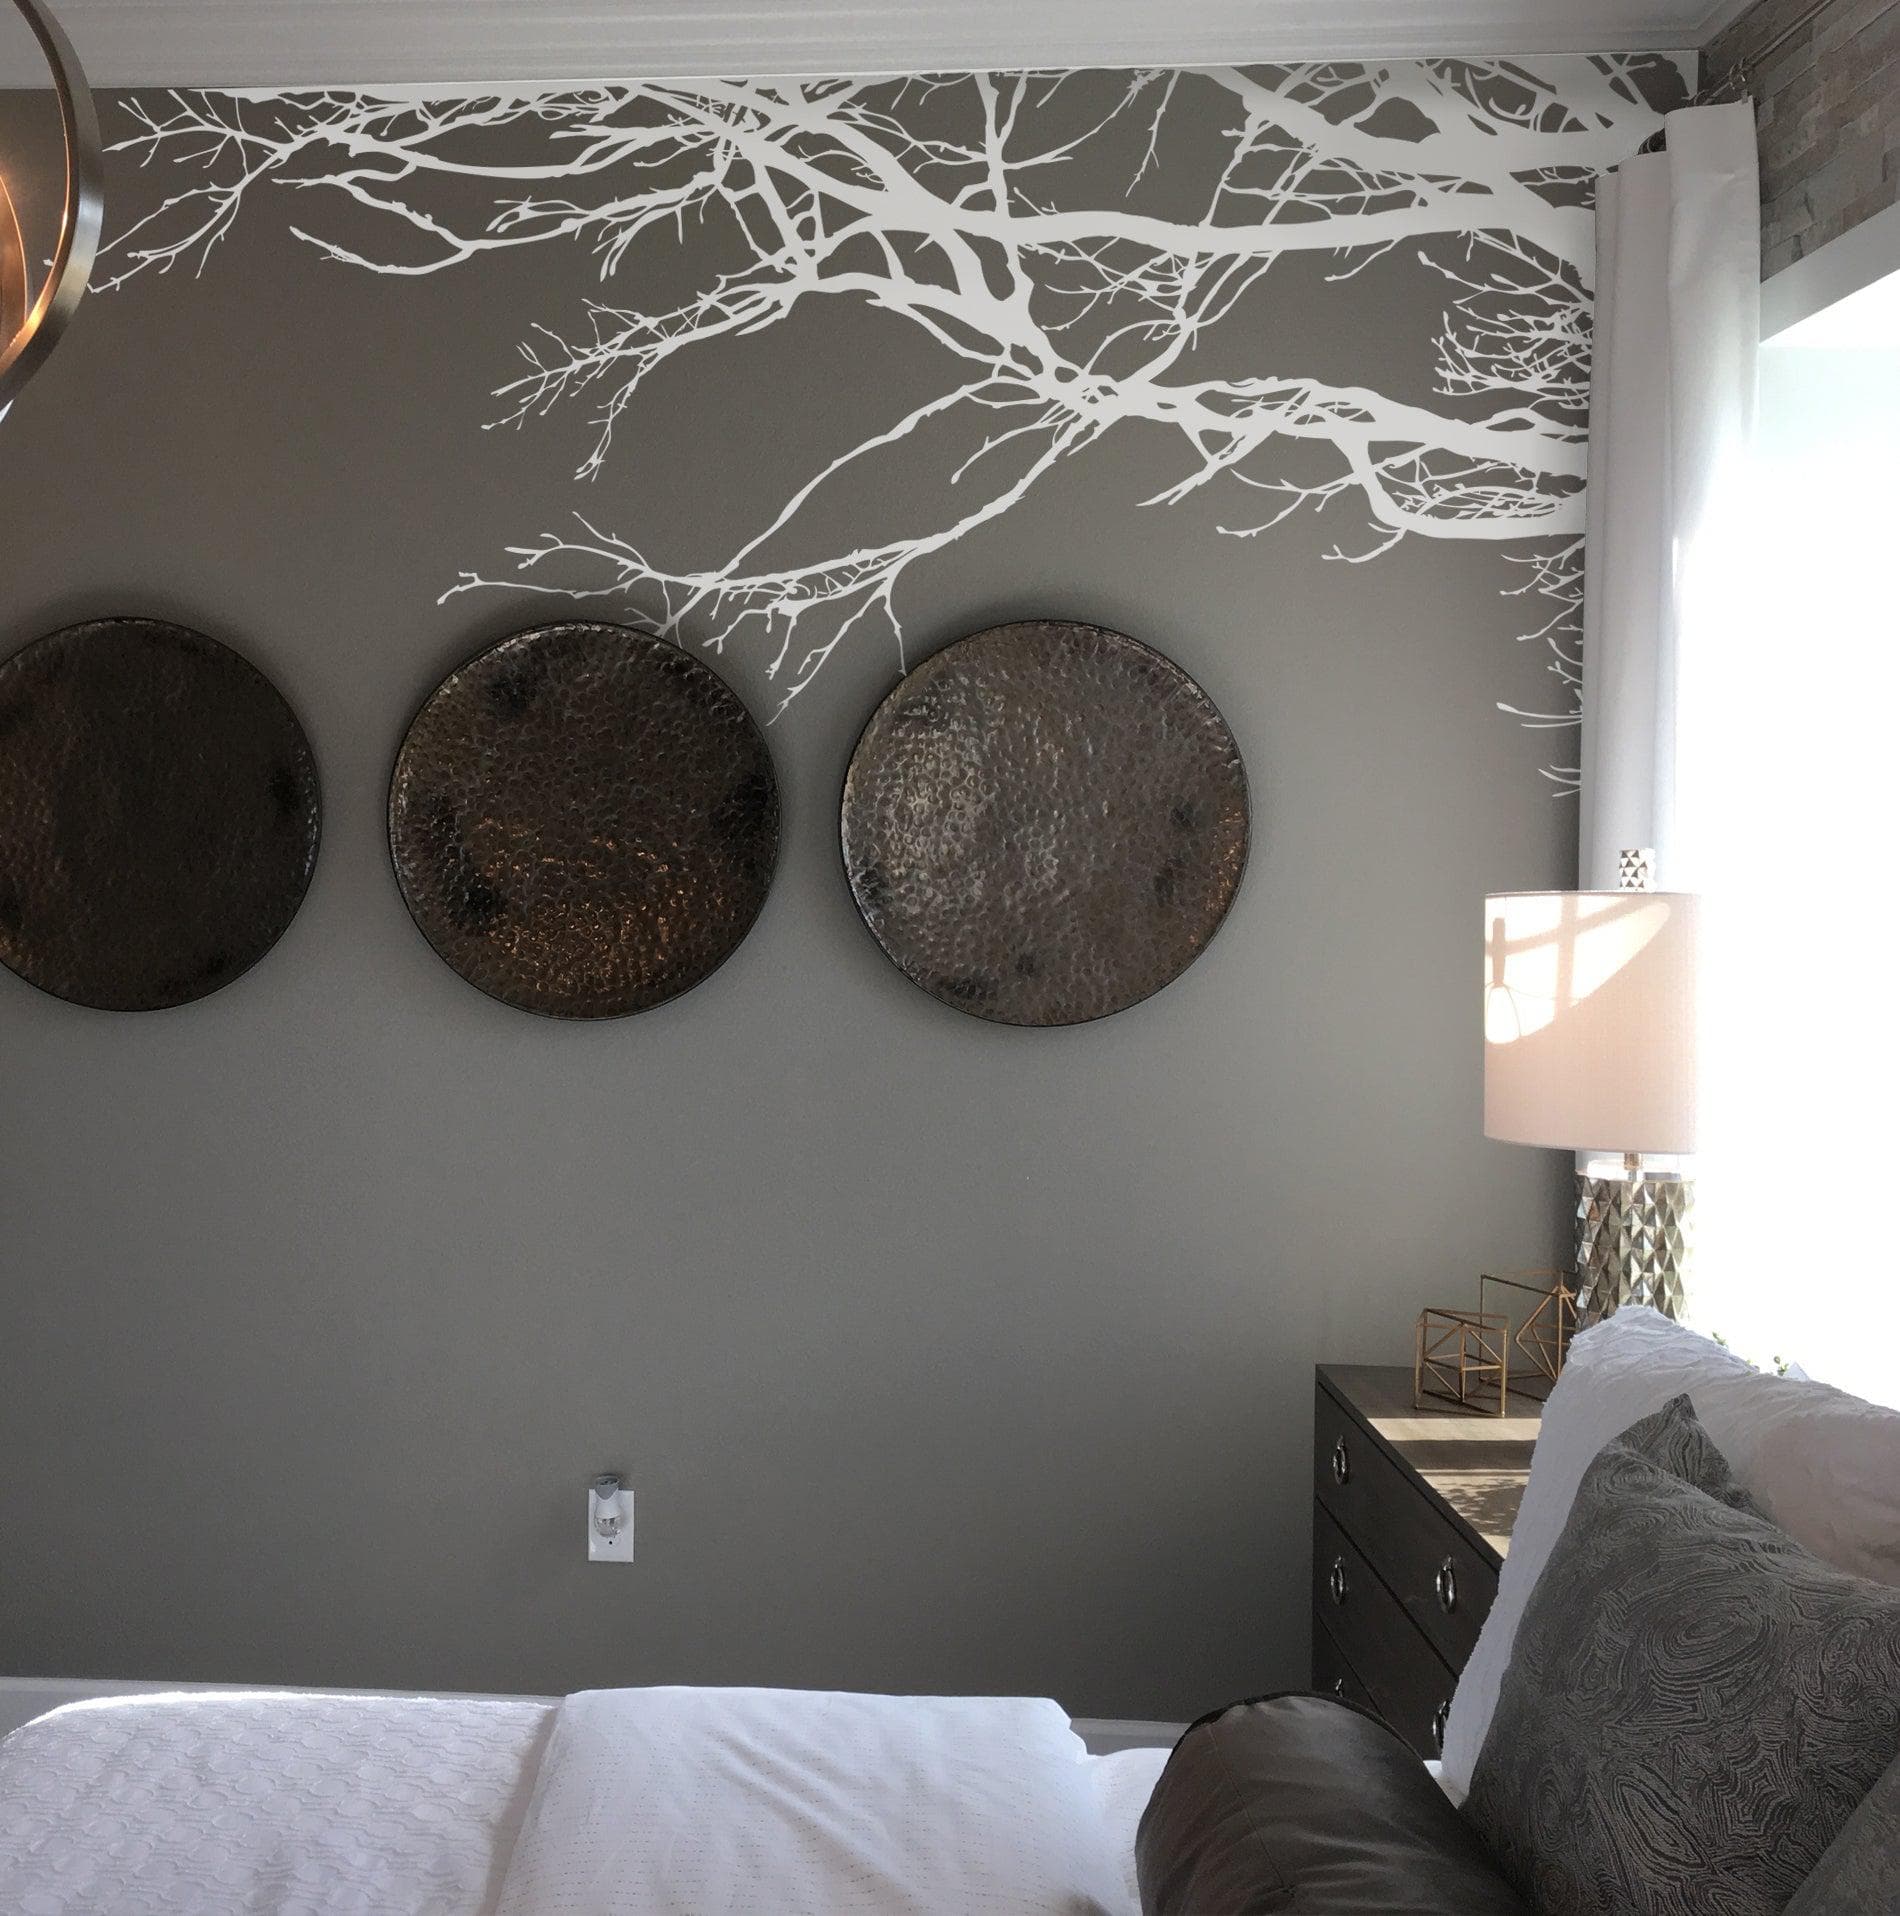 Dreamy Tree Branch Light Fixtures | Hygge Decor For Your Home - Hydrangea  Treehouse